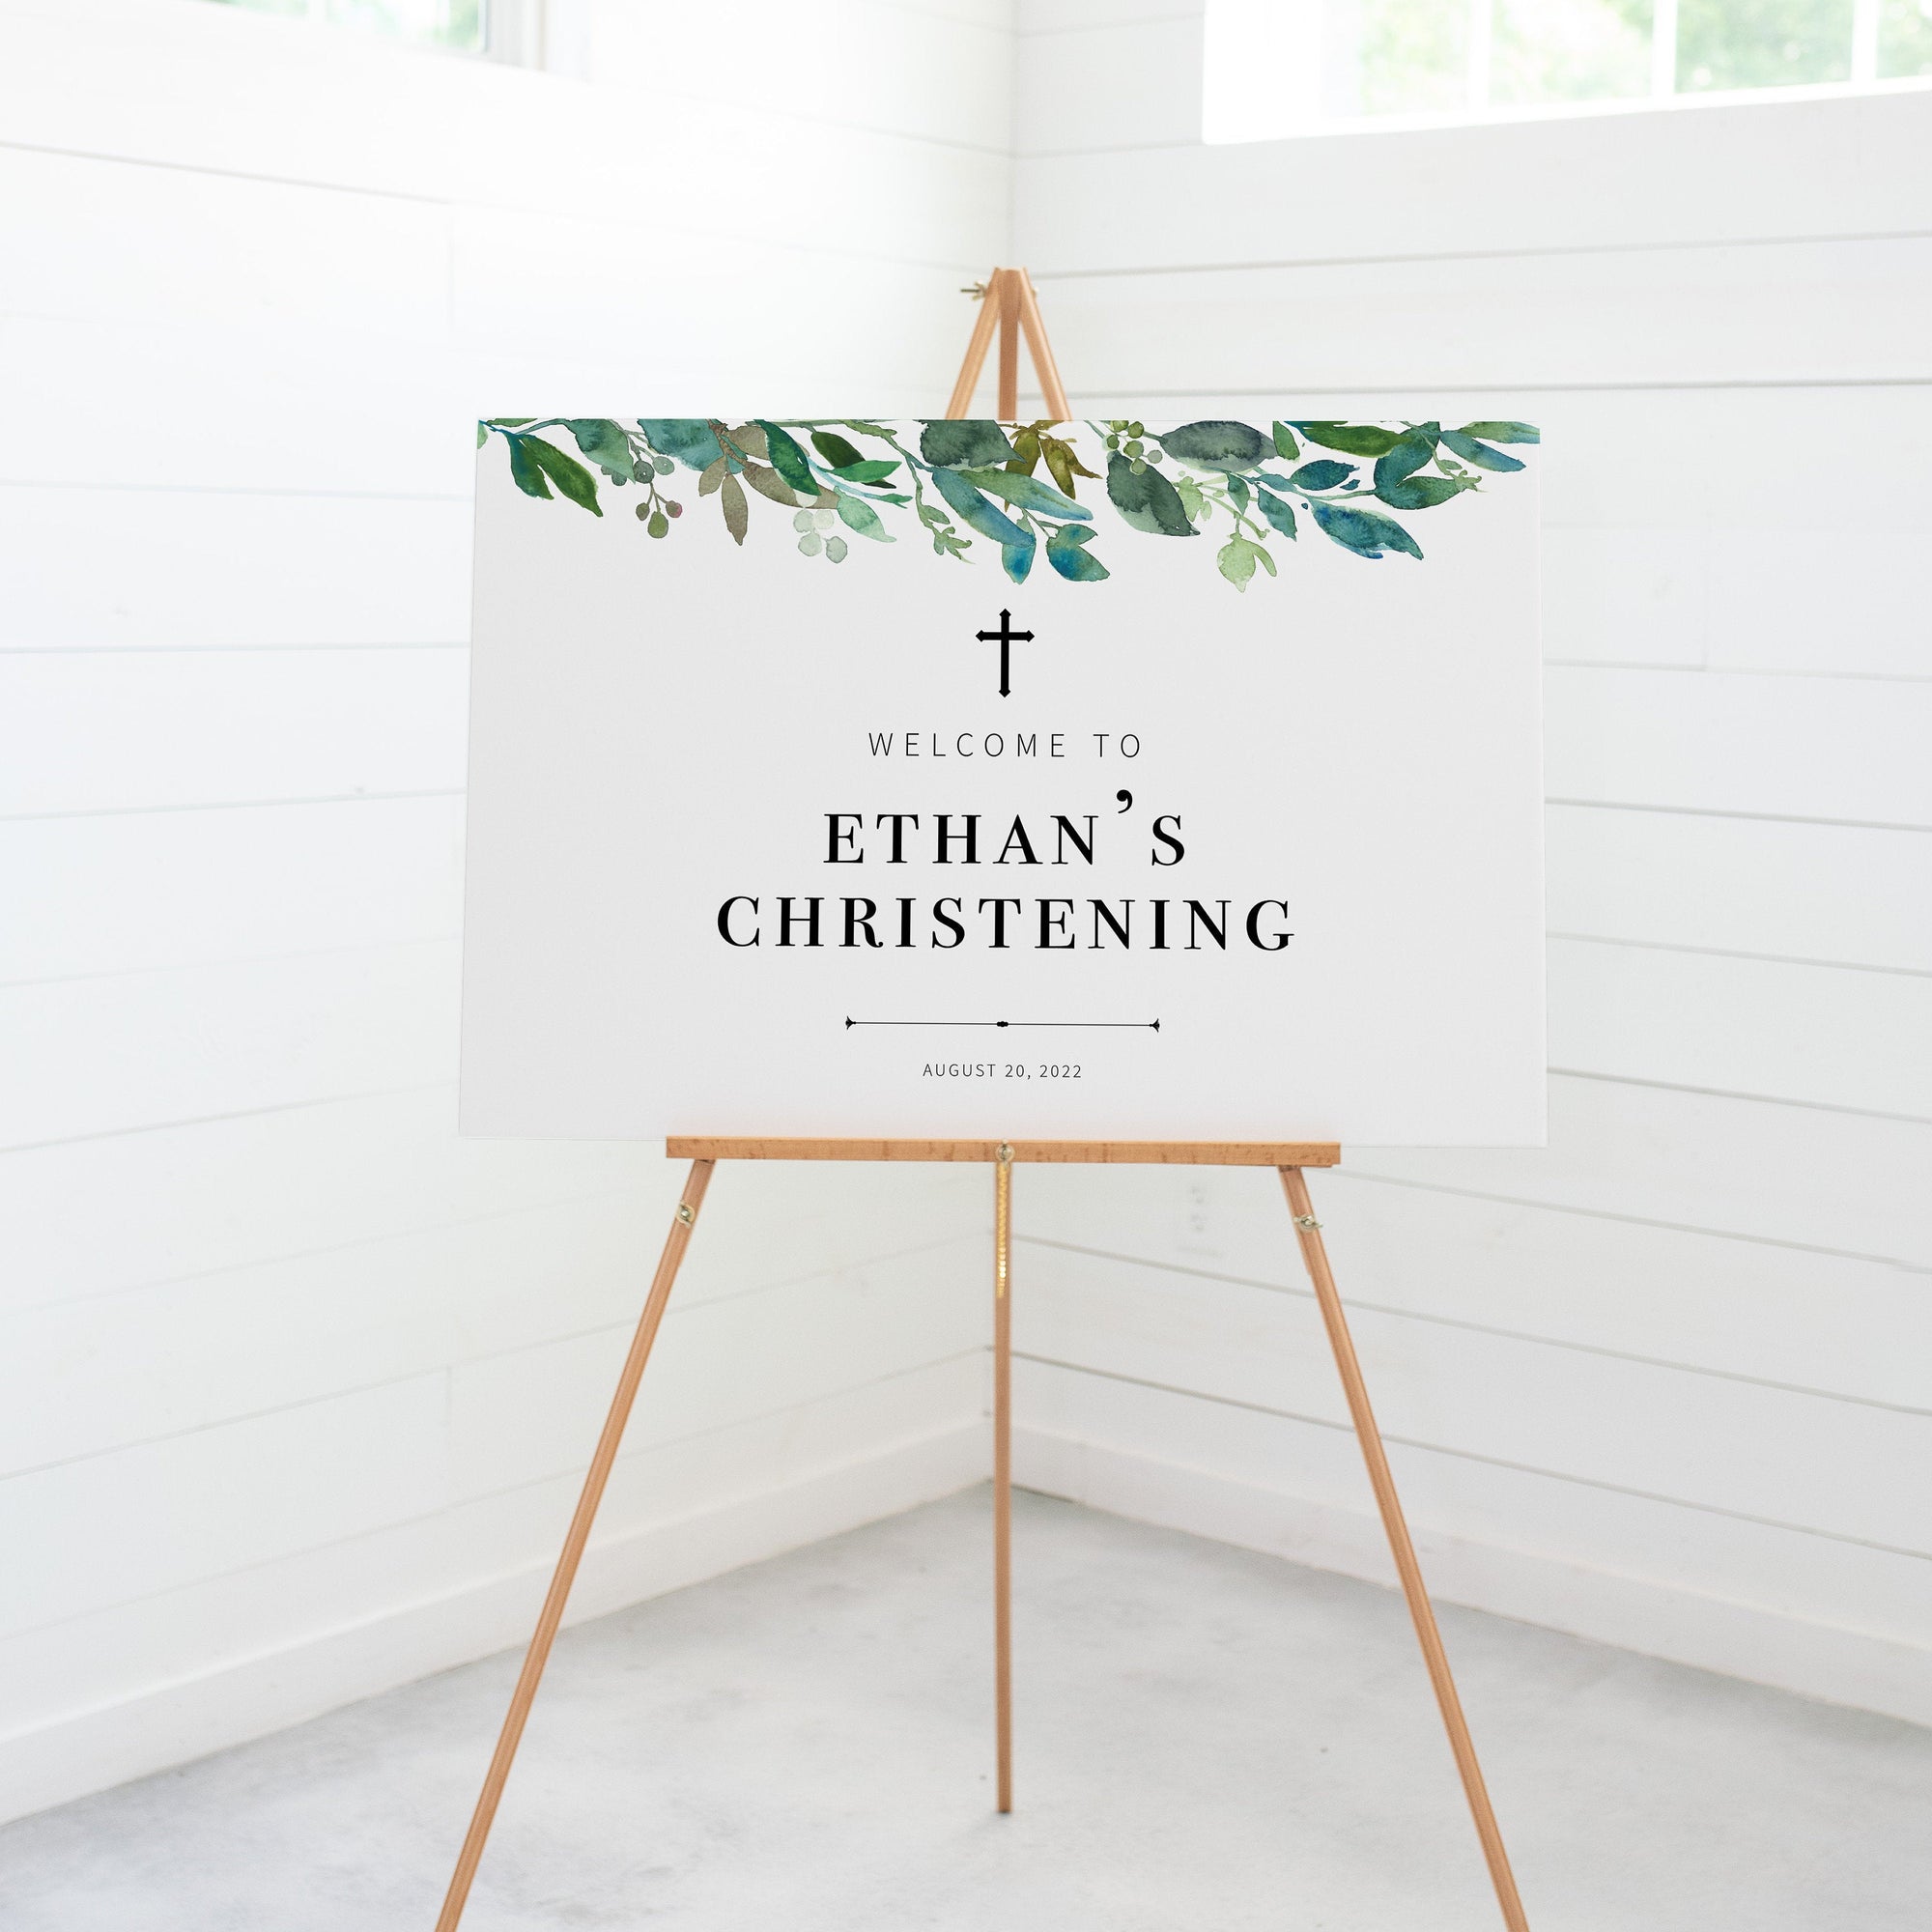 Greenery Christening Welcome Sign Template, Large Welcome Sign Printable, Boy Christening Decorations Greenery, INSTANT DOWNLOAD - G100